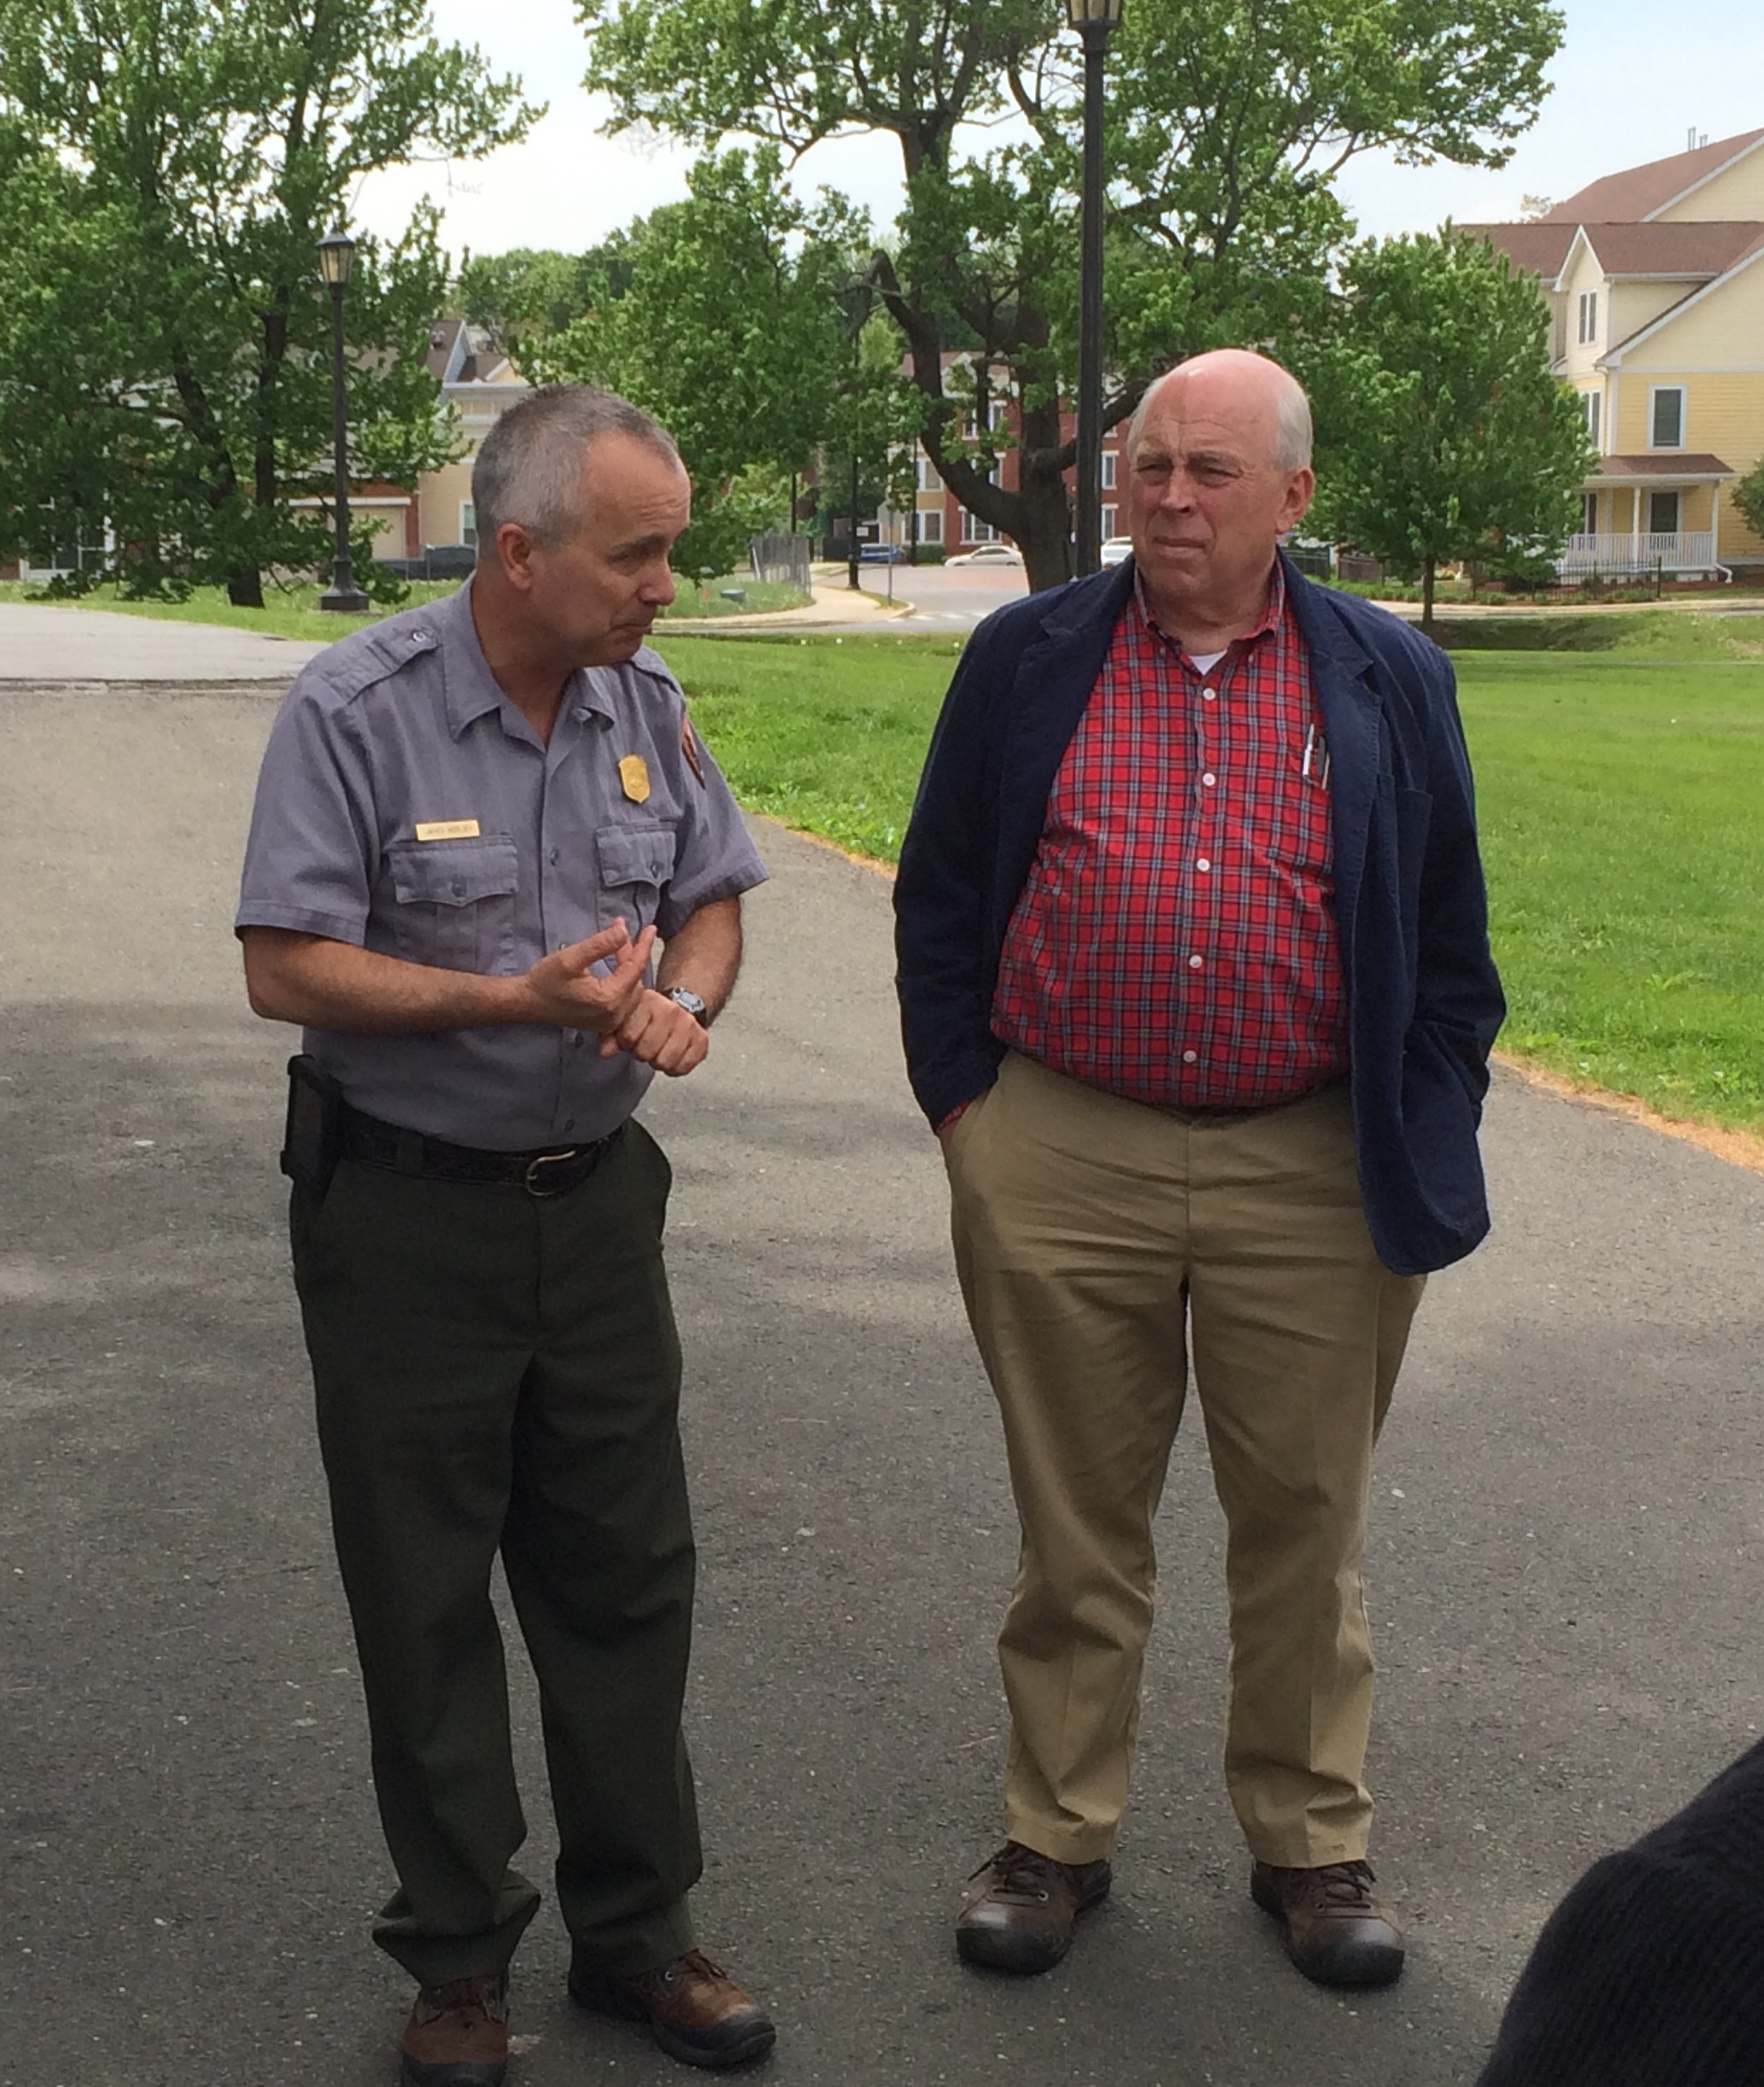 Two of our tour guides were James Woolsey (left) and Jack Hale (right).